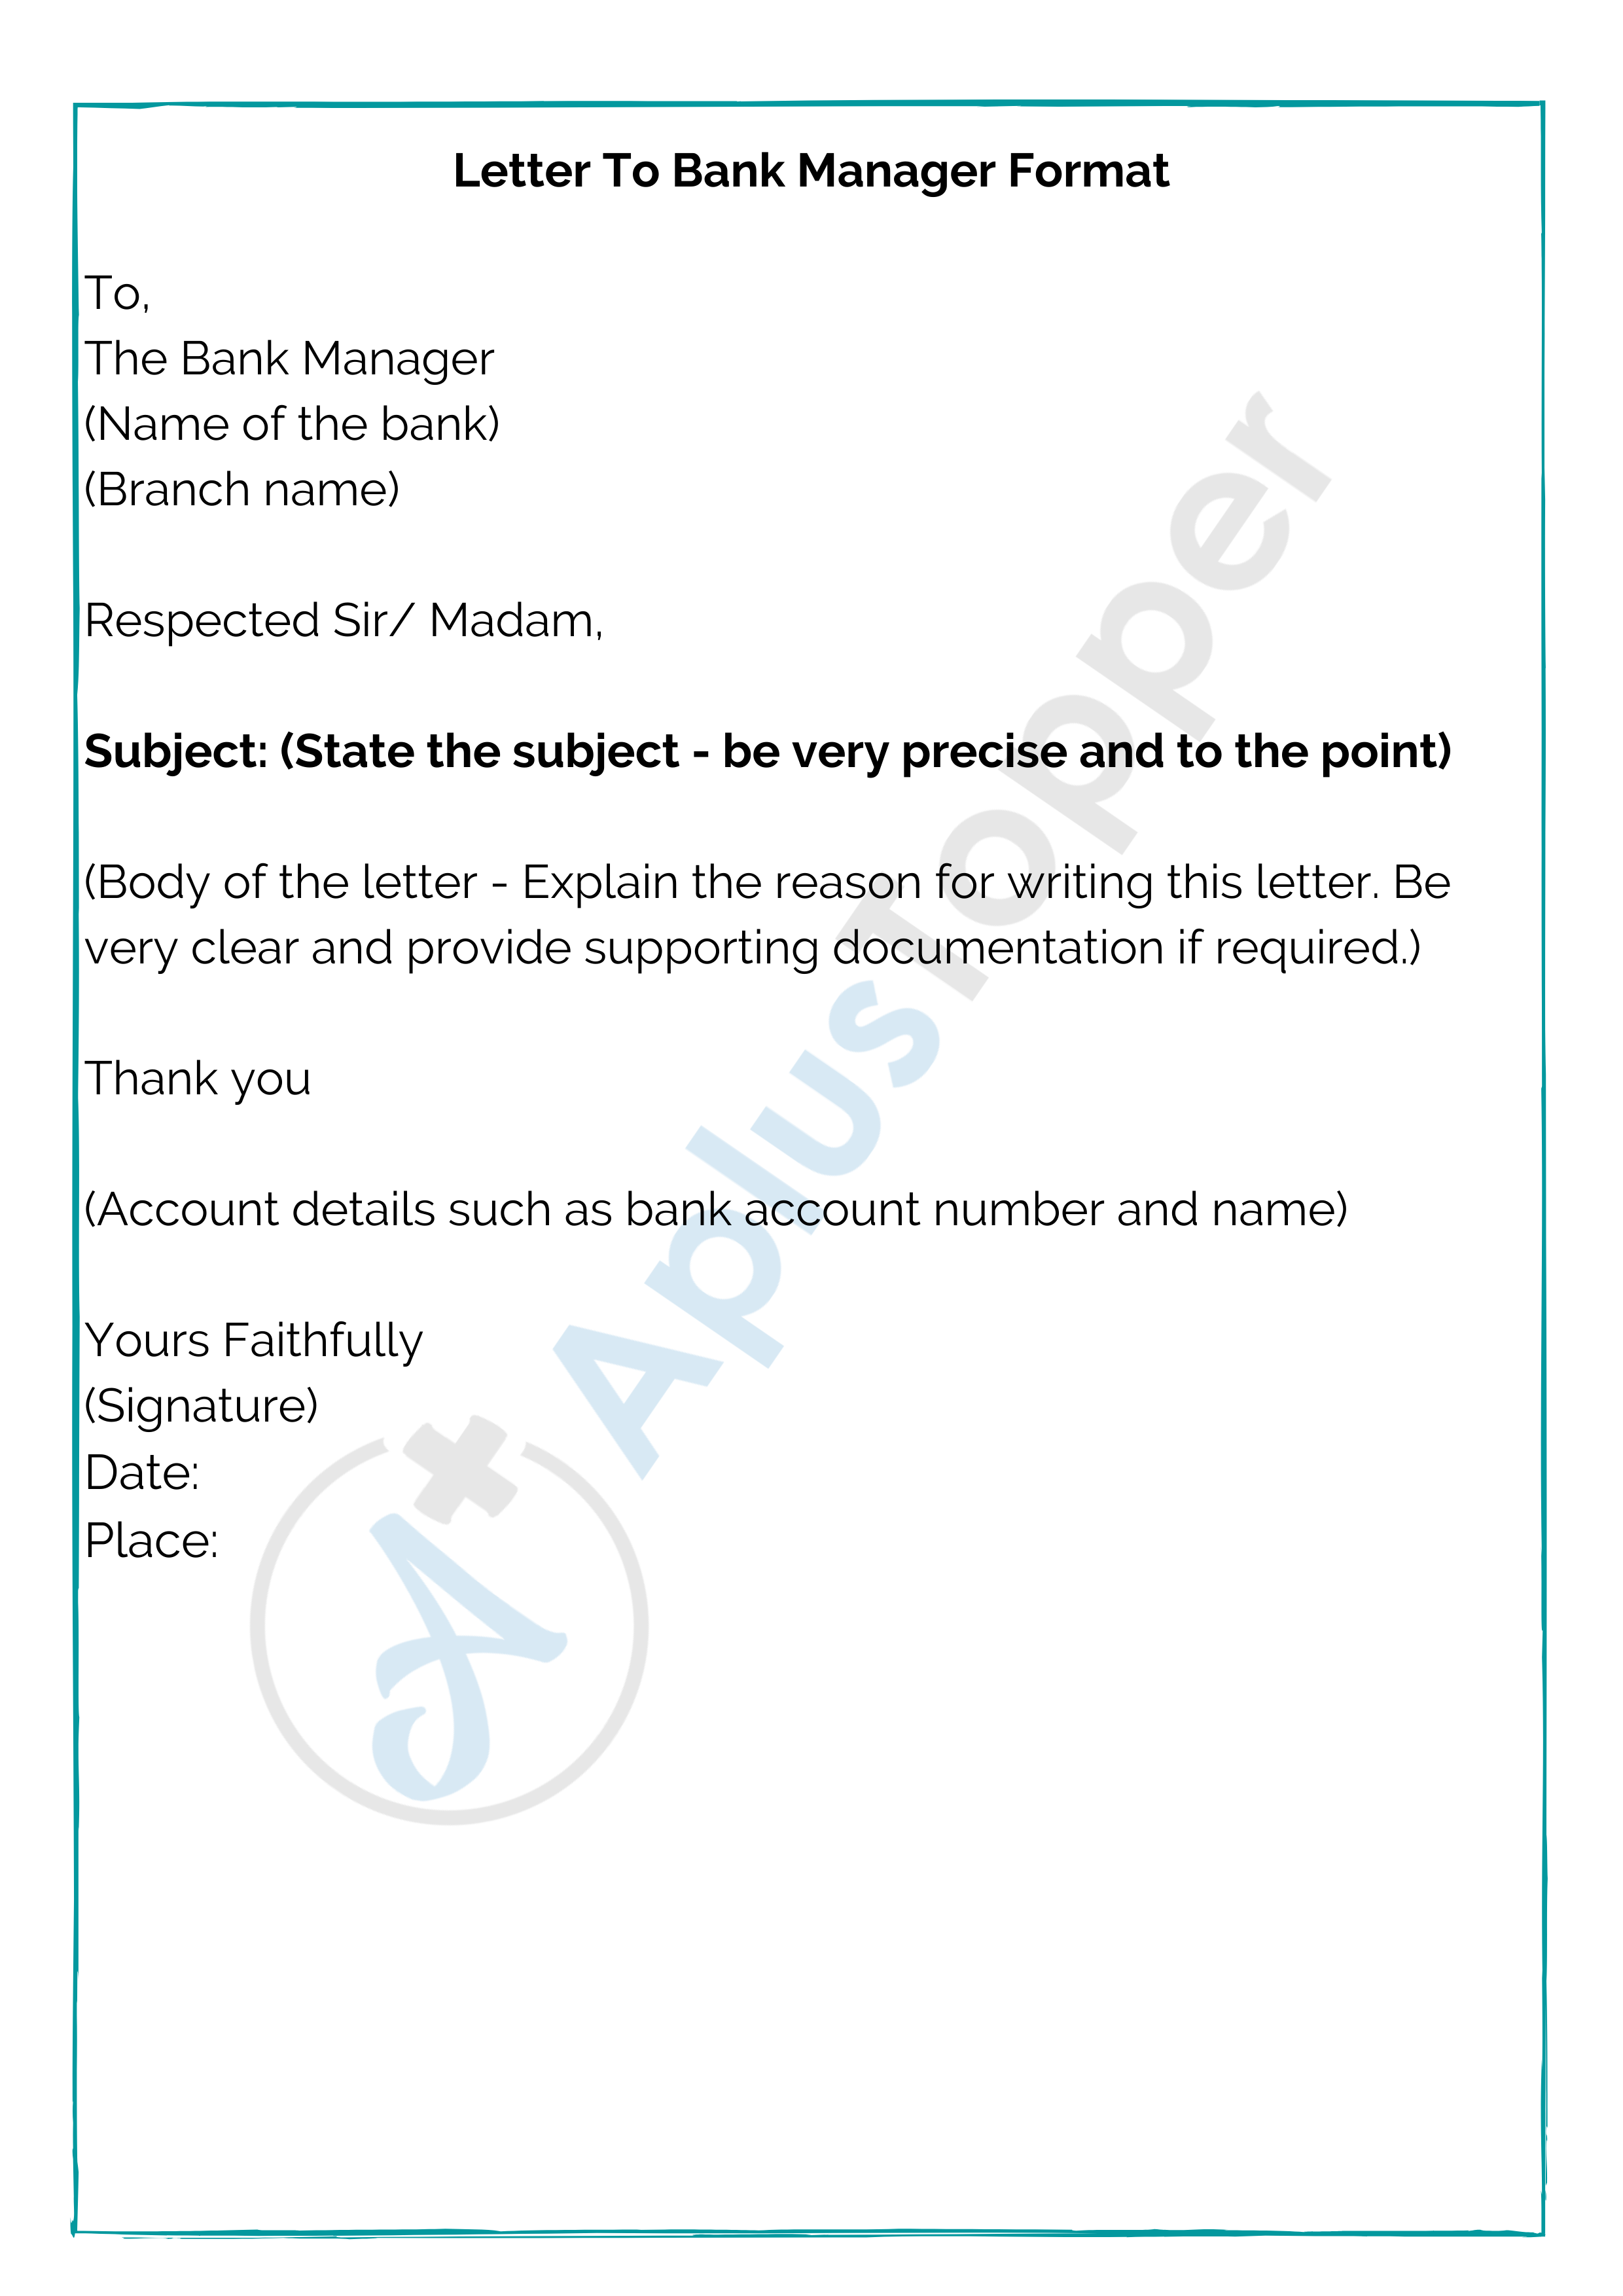 how to write application letter to bank branch manager